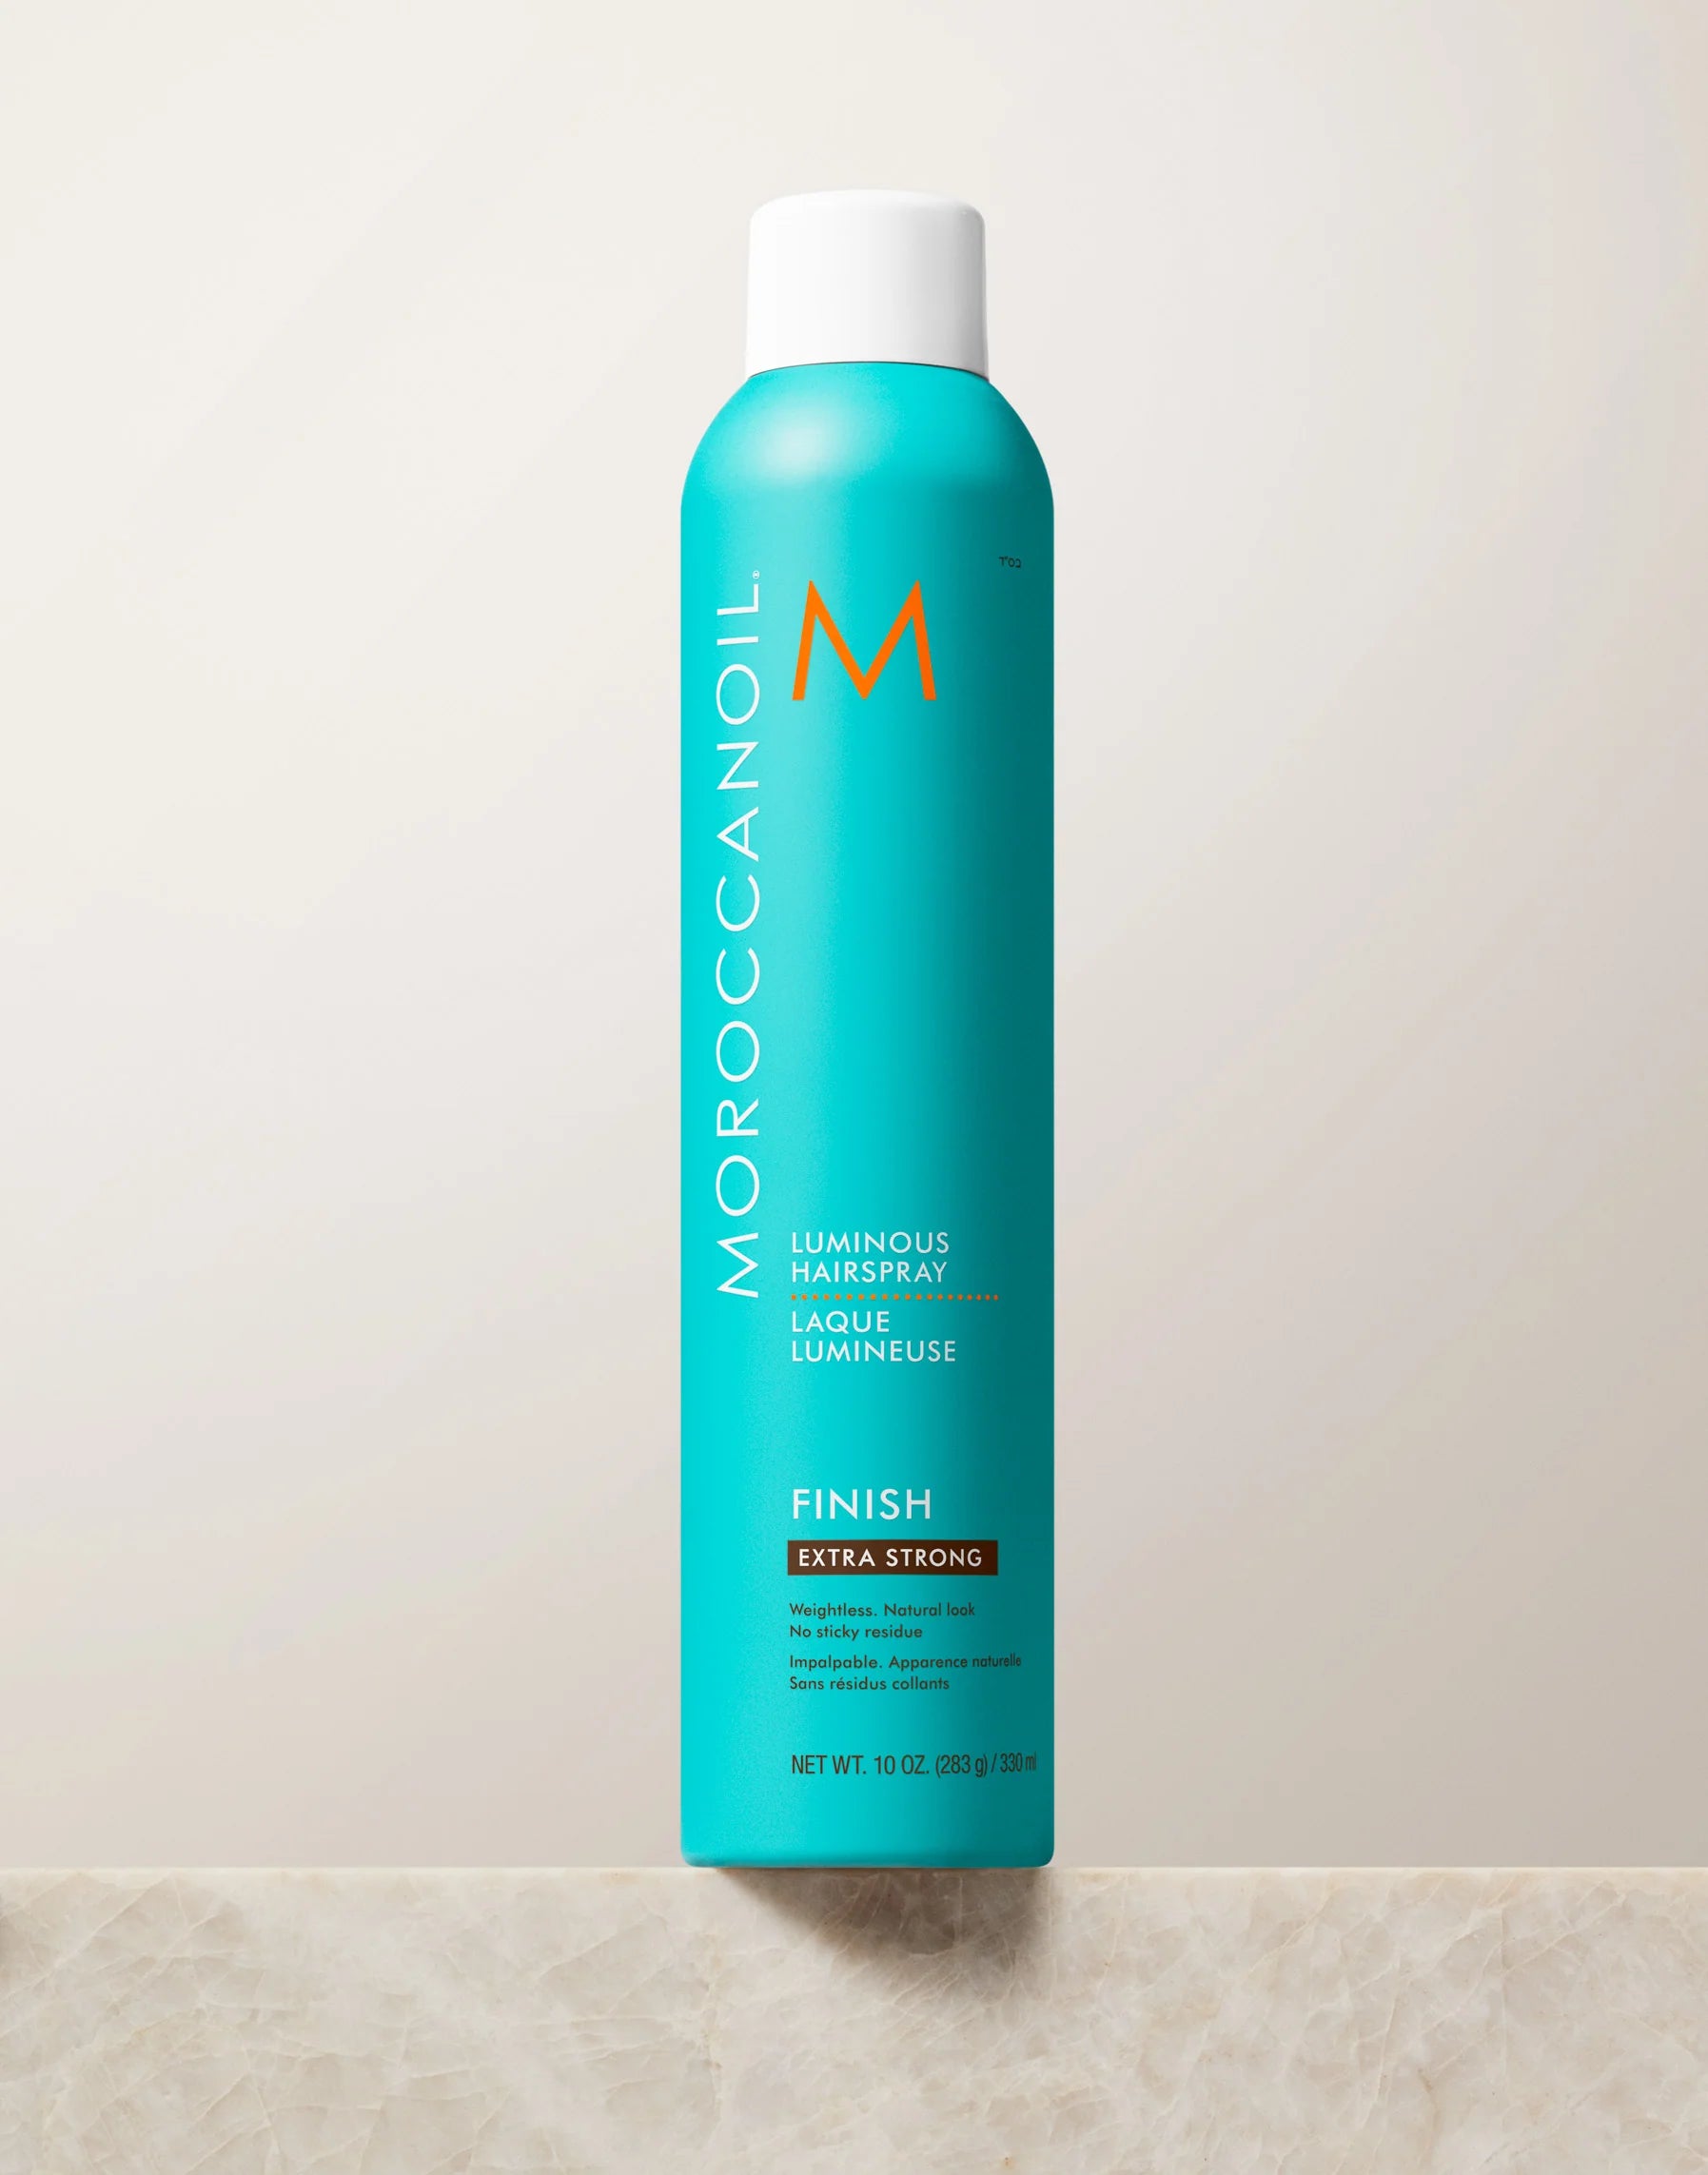 Radiant hairspray for extra strong hold (MoroccanOil Luminous Hairspray Extra Strong)